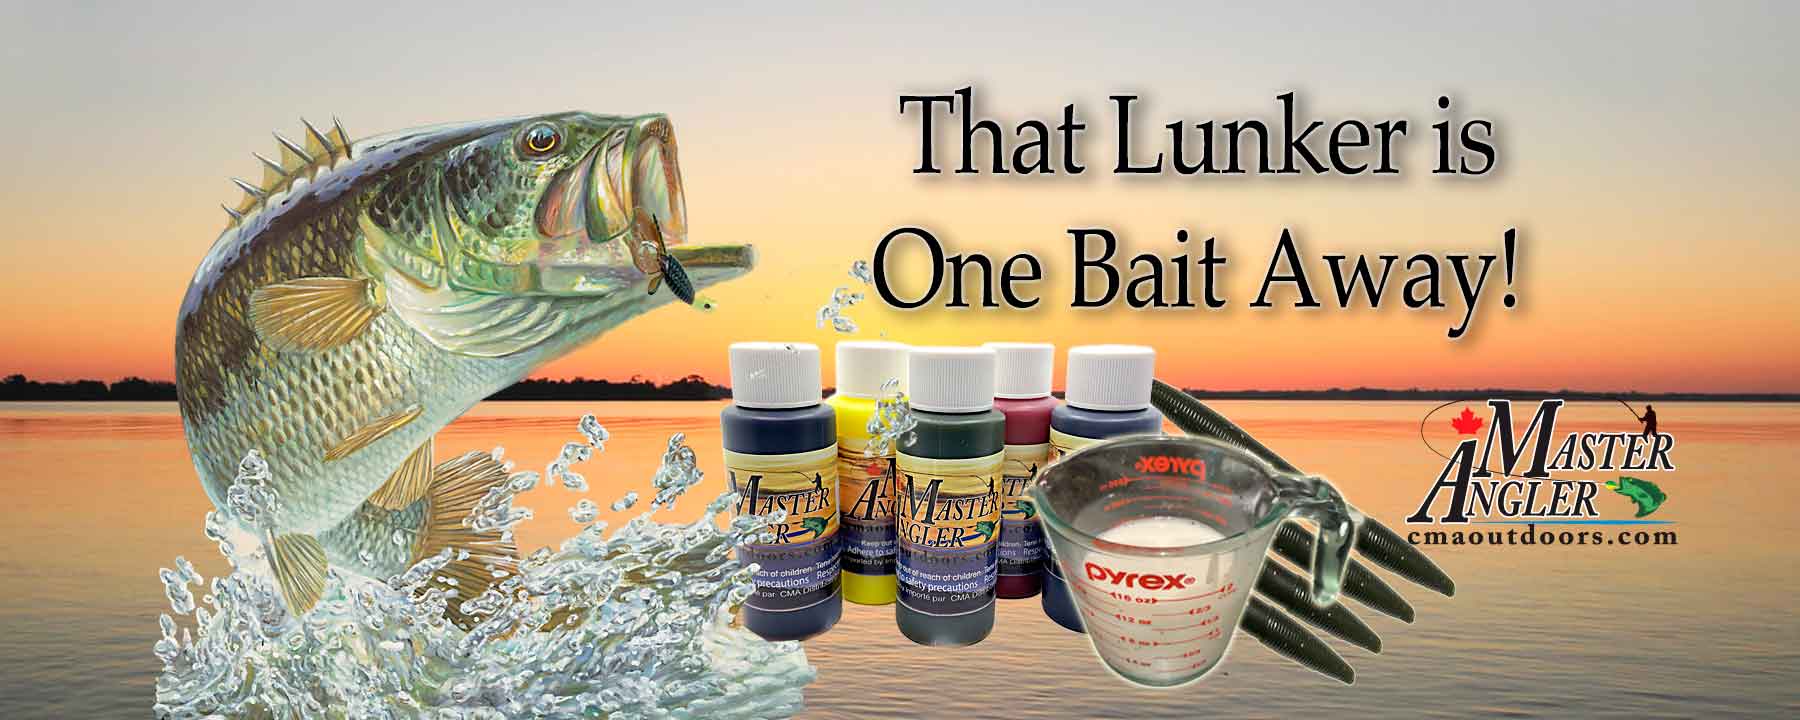 Largemouth bass attacking soft plastic bait made by you. That Lunker is one bait away